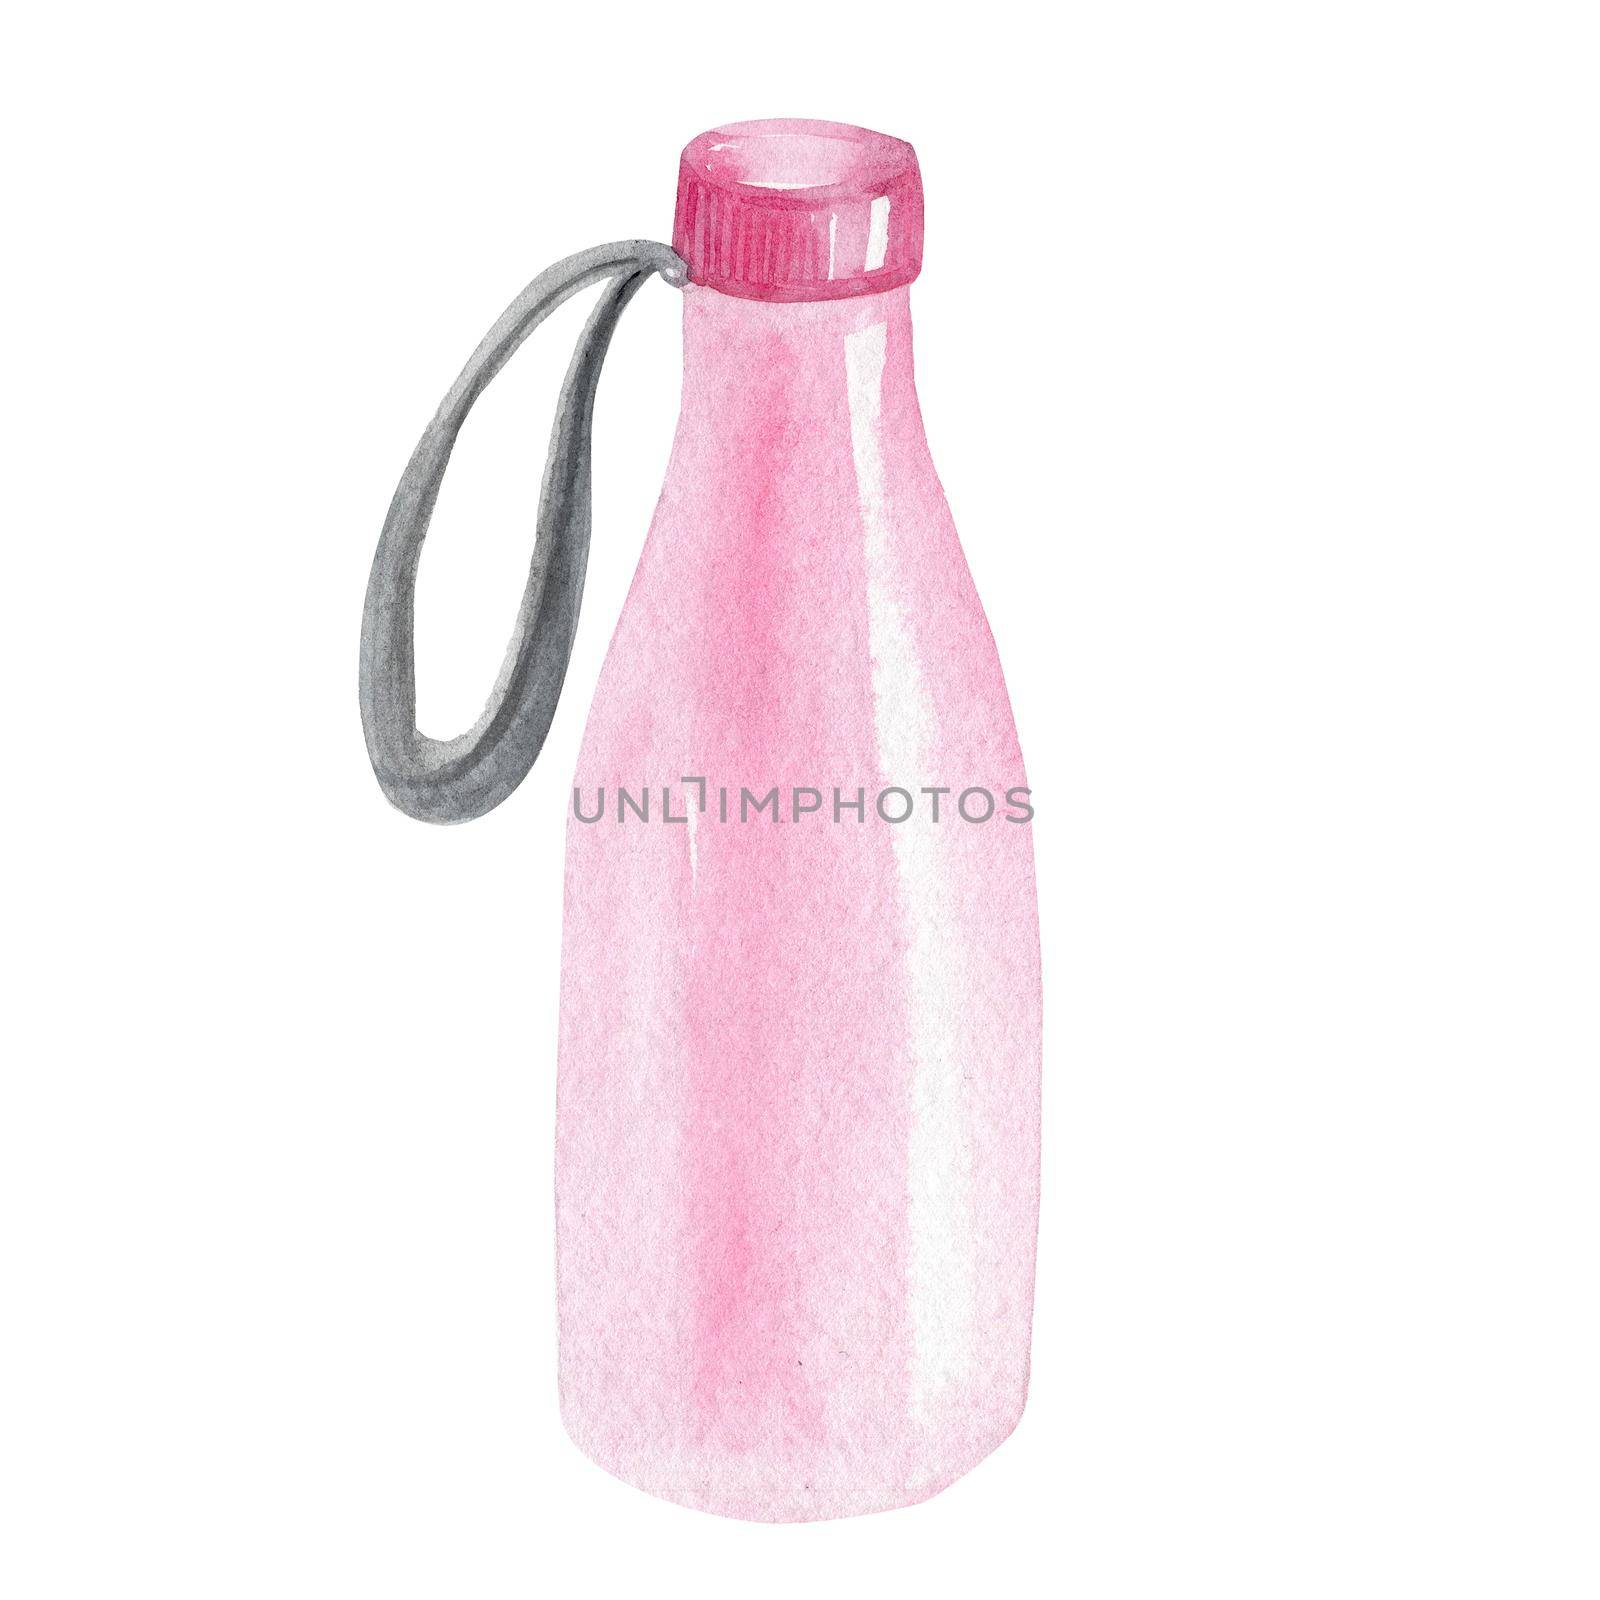 watercolor pink bottle for drinks isolated on white background. fitness bottle by dreamloud